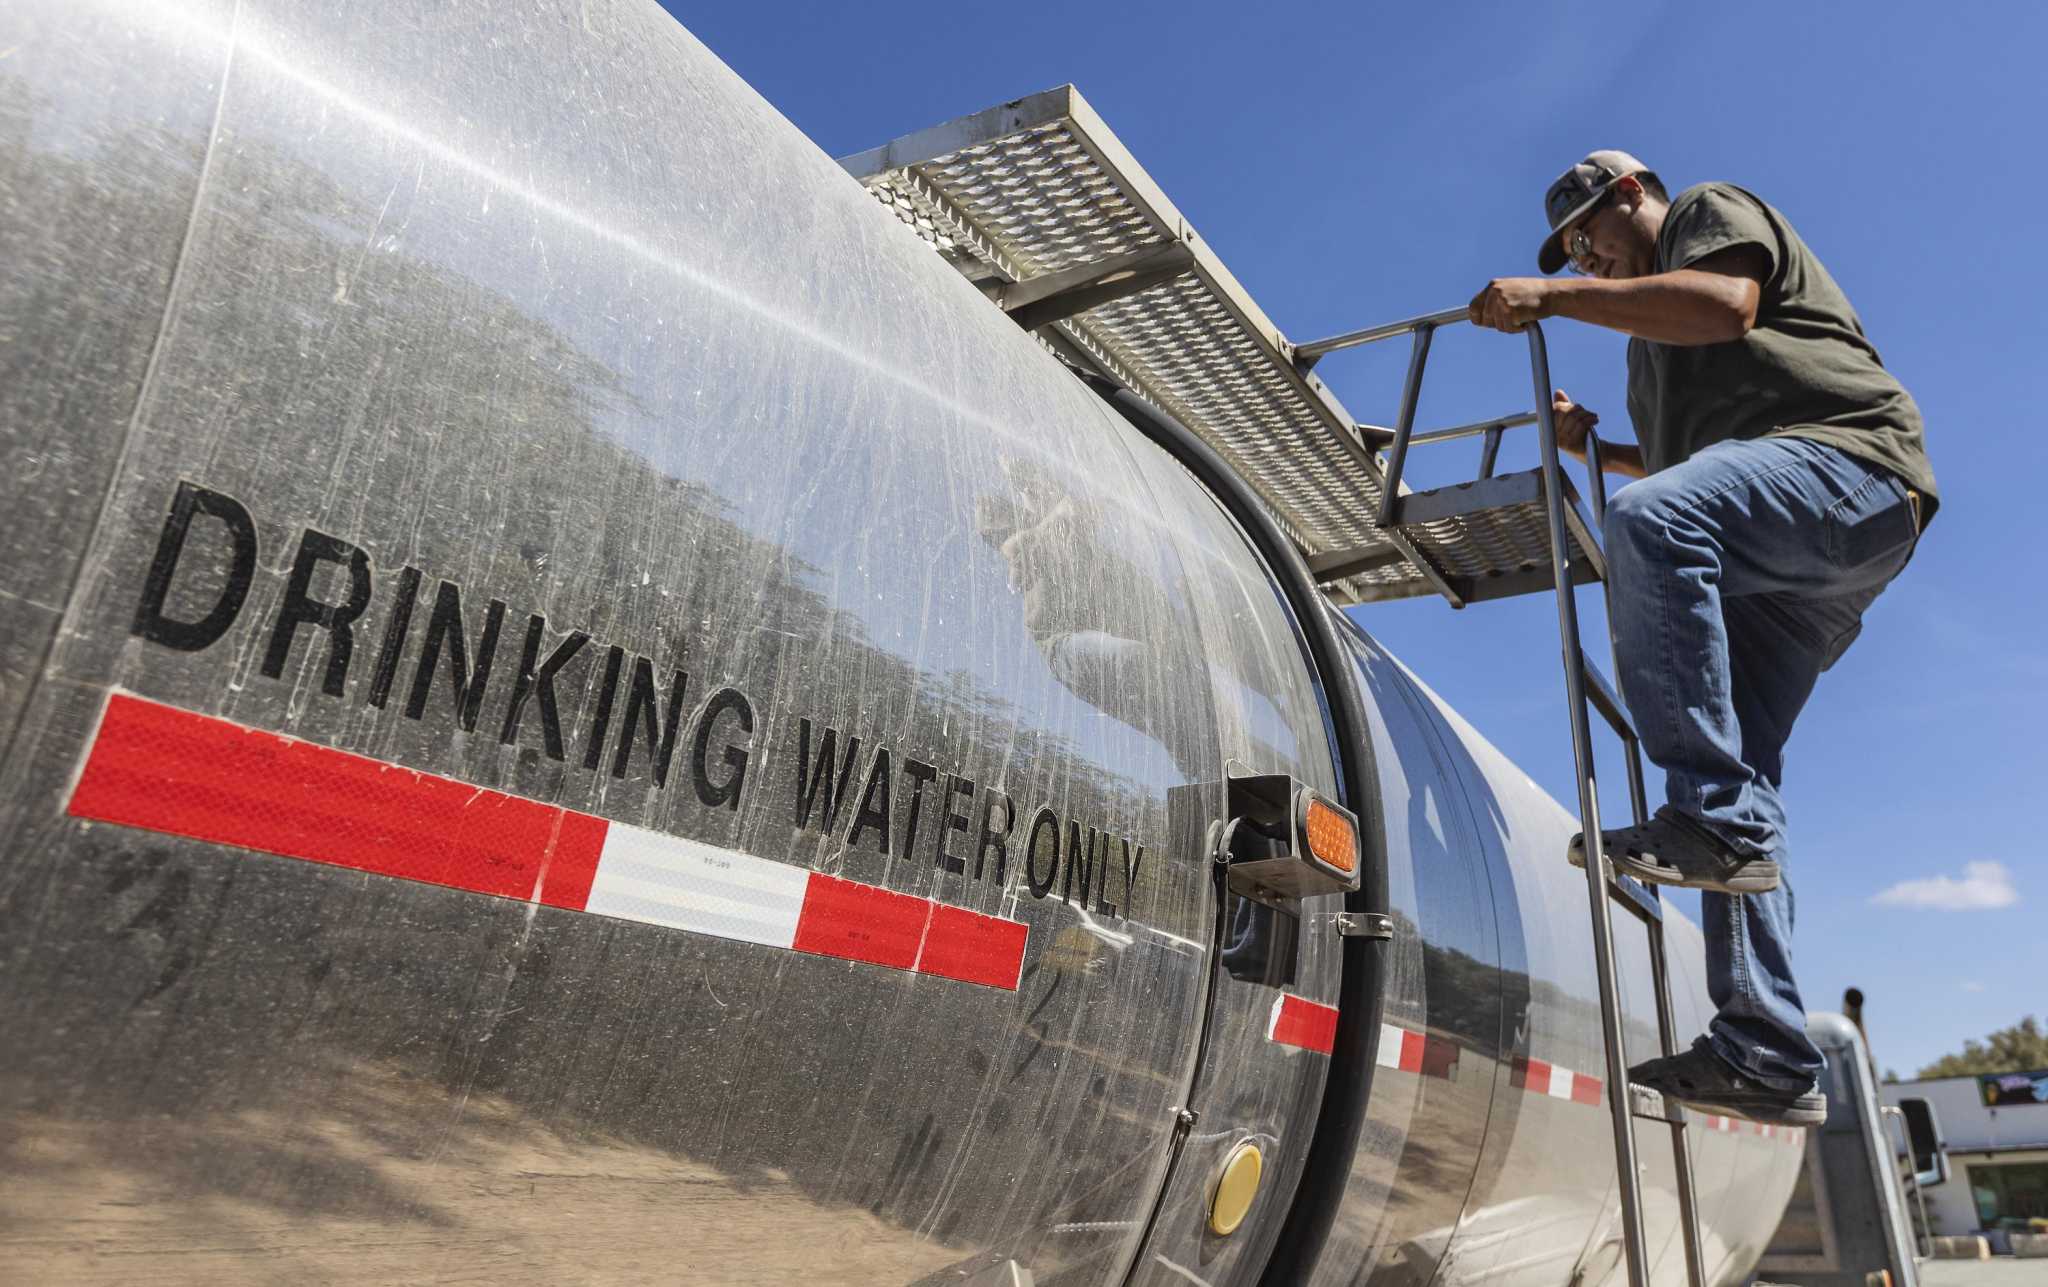 Truckers answer the call as a small Texas town runs out of water